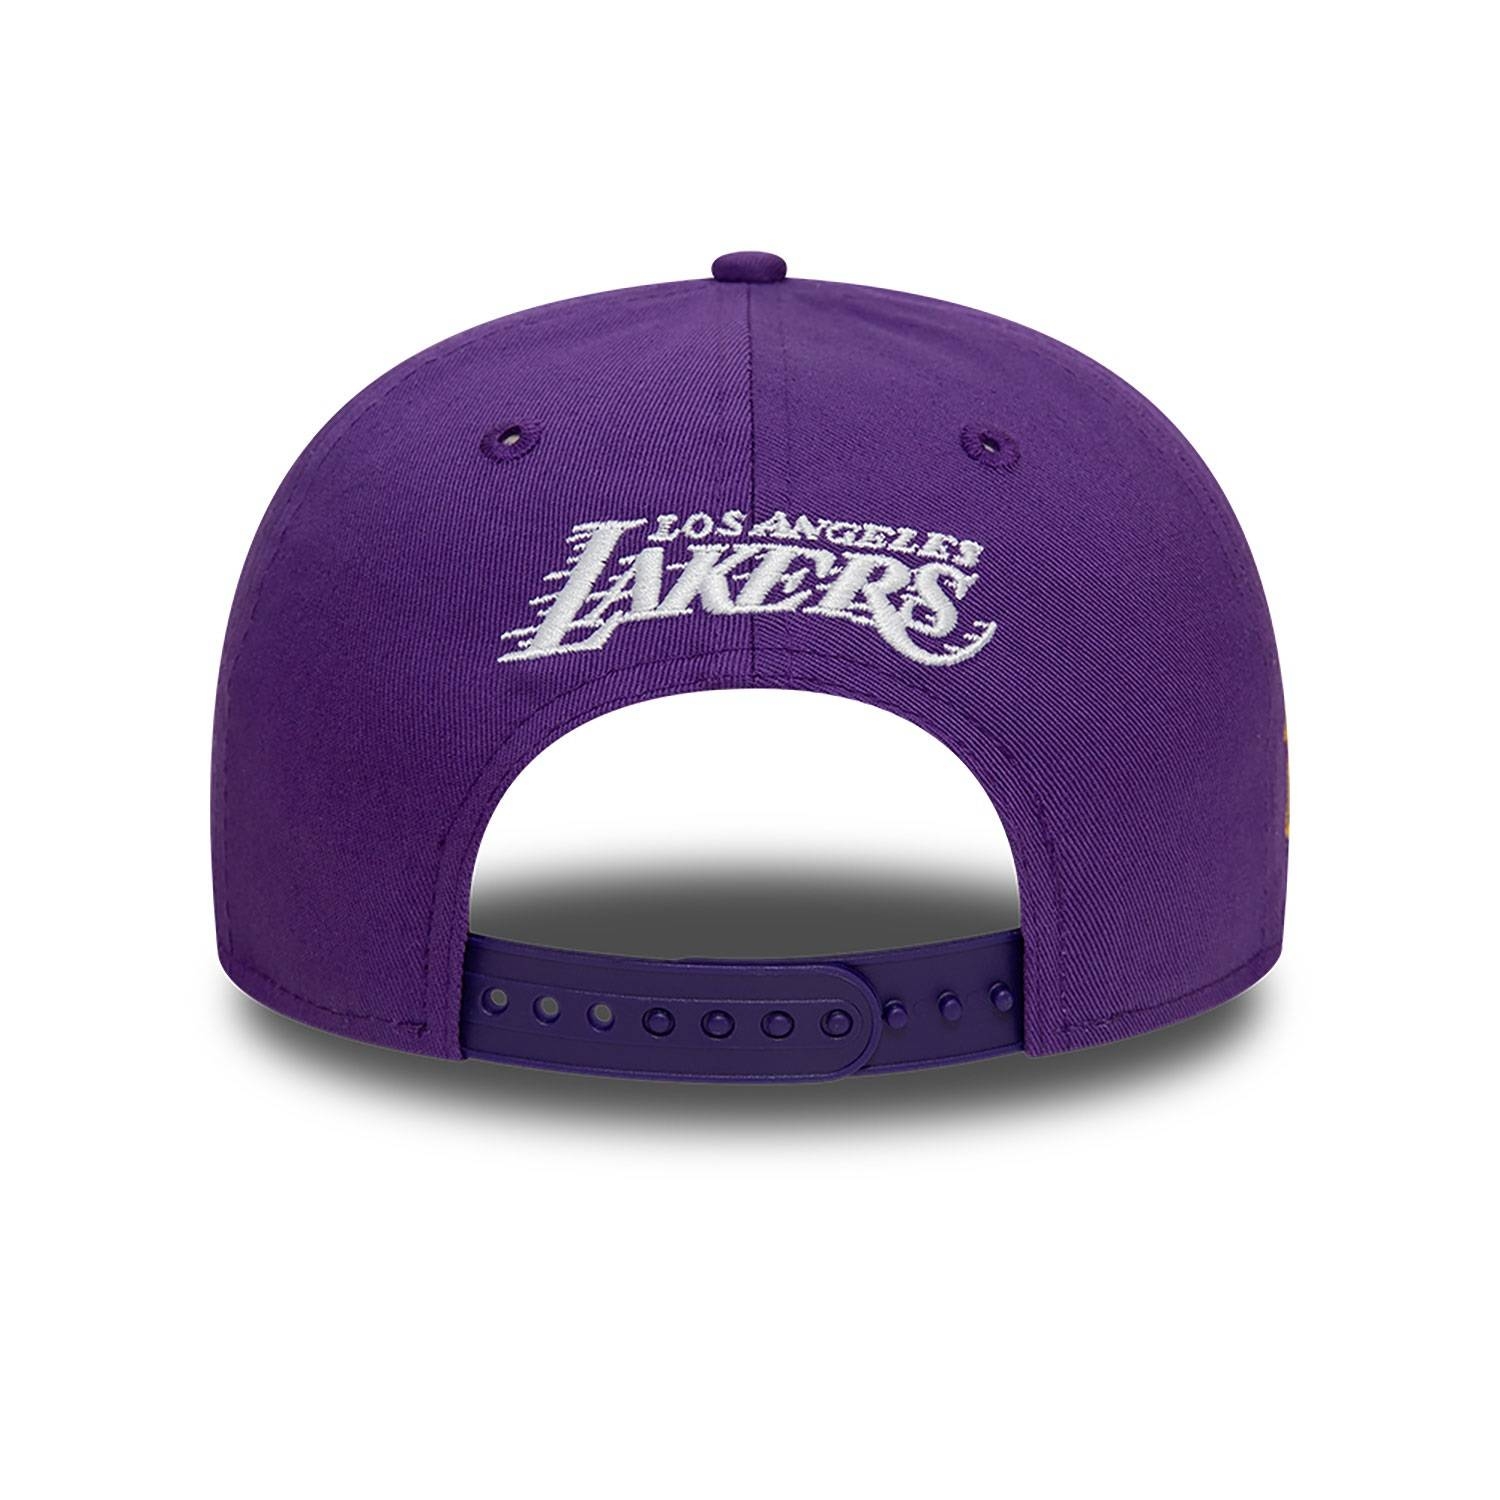 NEW ERA NBA PATCH 9FIFTY LOS ANGELES LAKERS